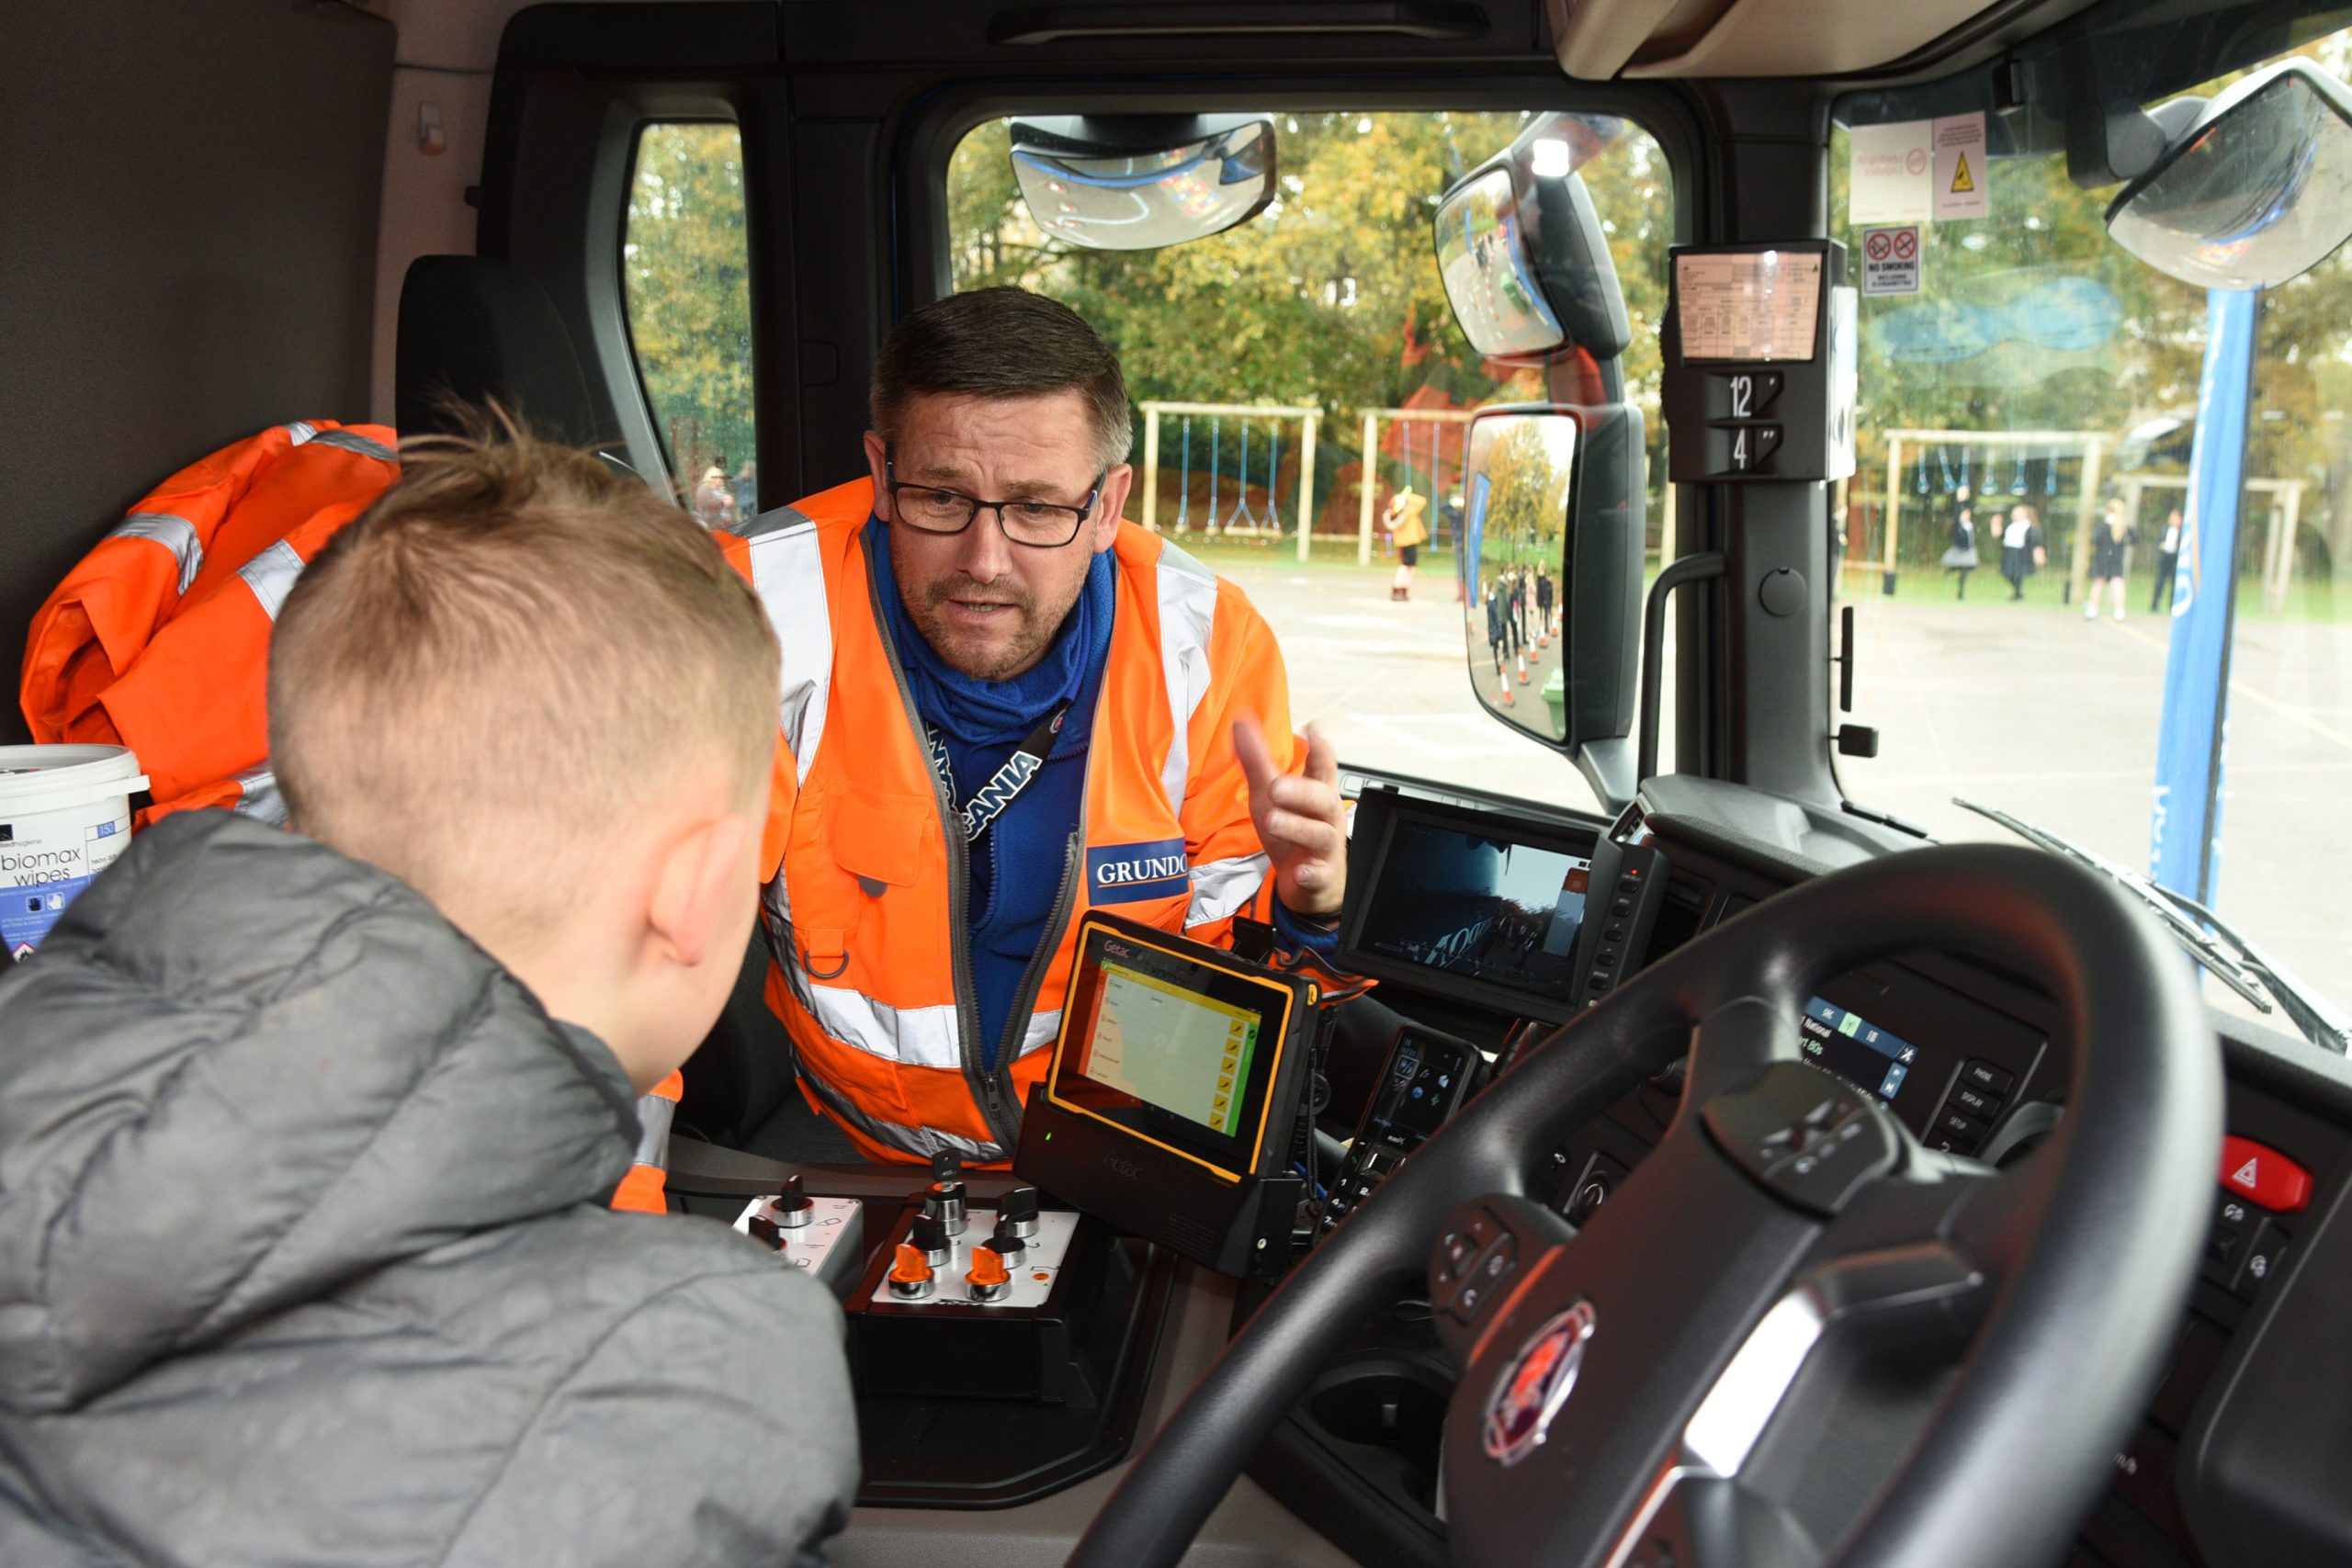 One Newbury pupil sits inside the cab as Paul Douglas, Transport Trainer at Grundon talked through the safety features